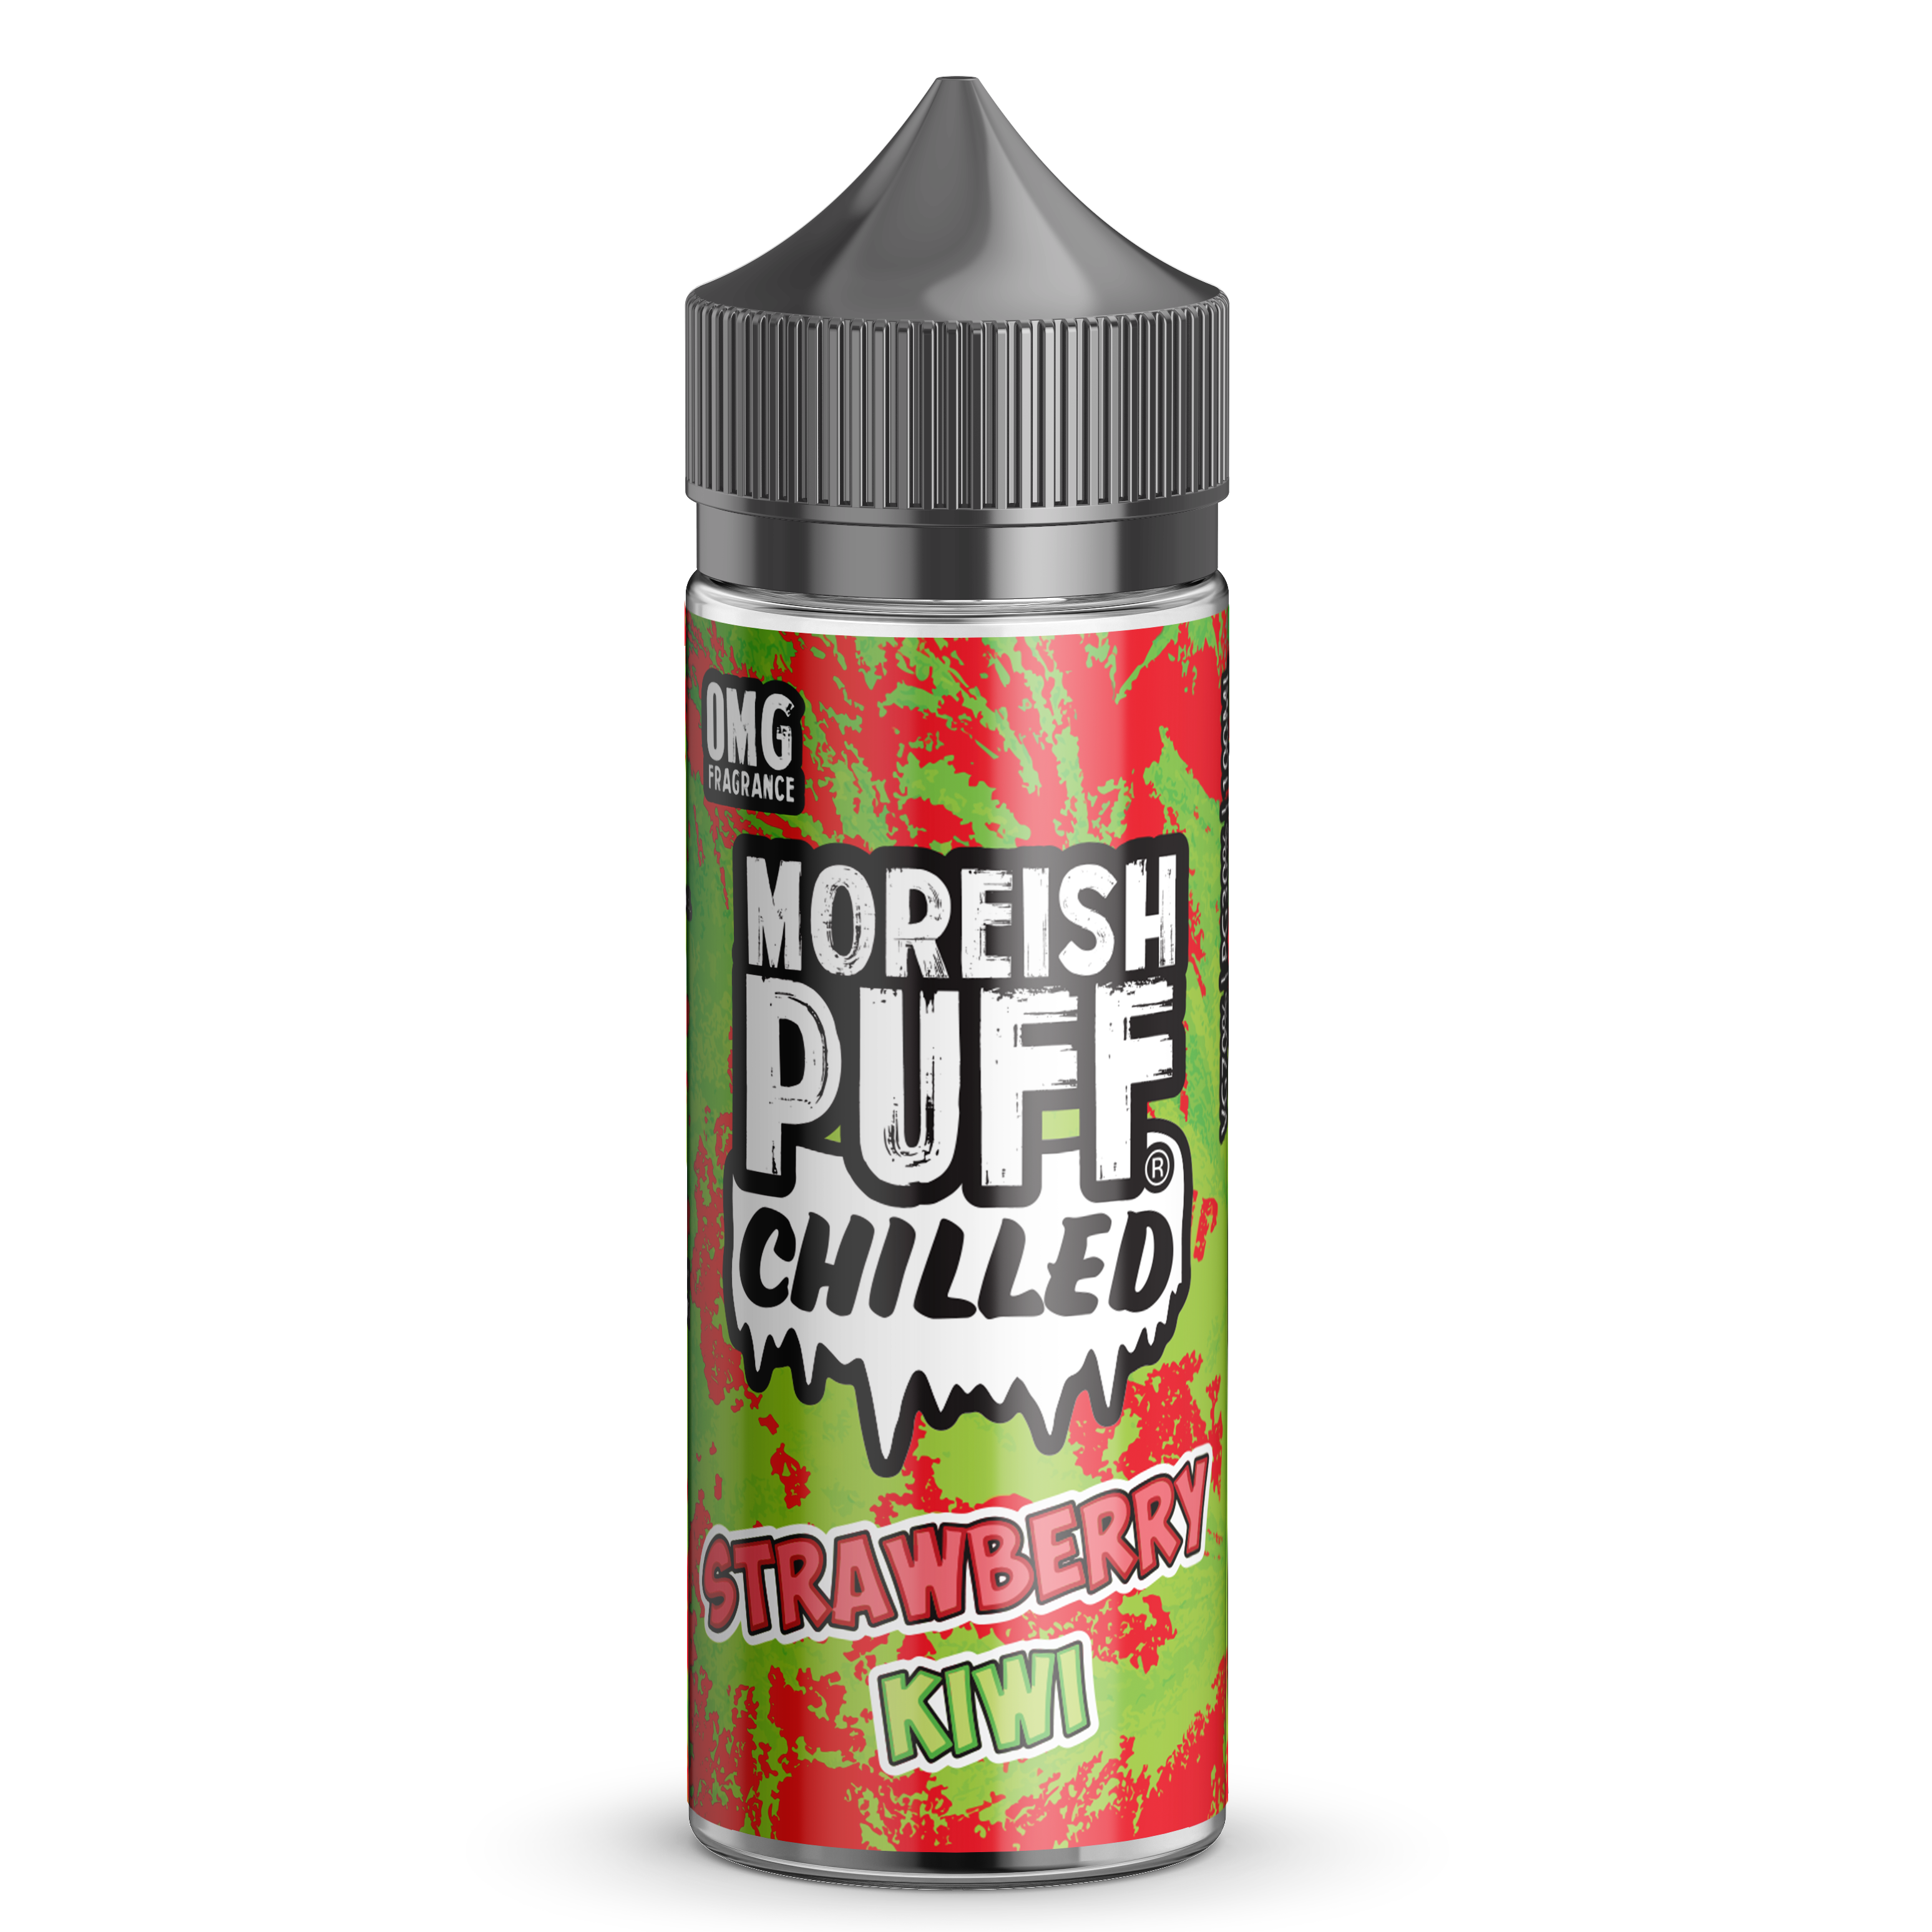 Strawberry and Kiwi Chilled E-liquid by Moreish Puff 100ml Shortfill